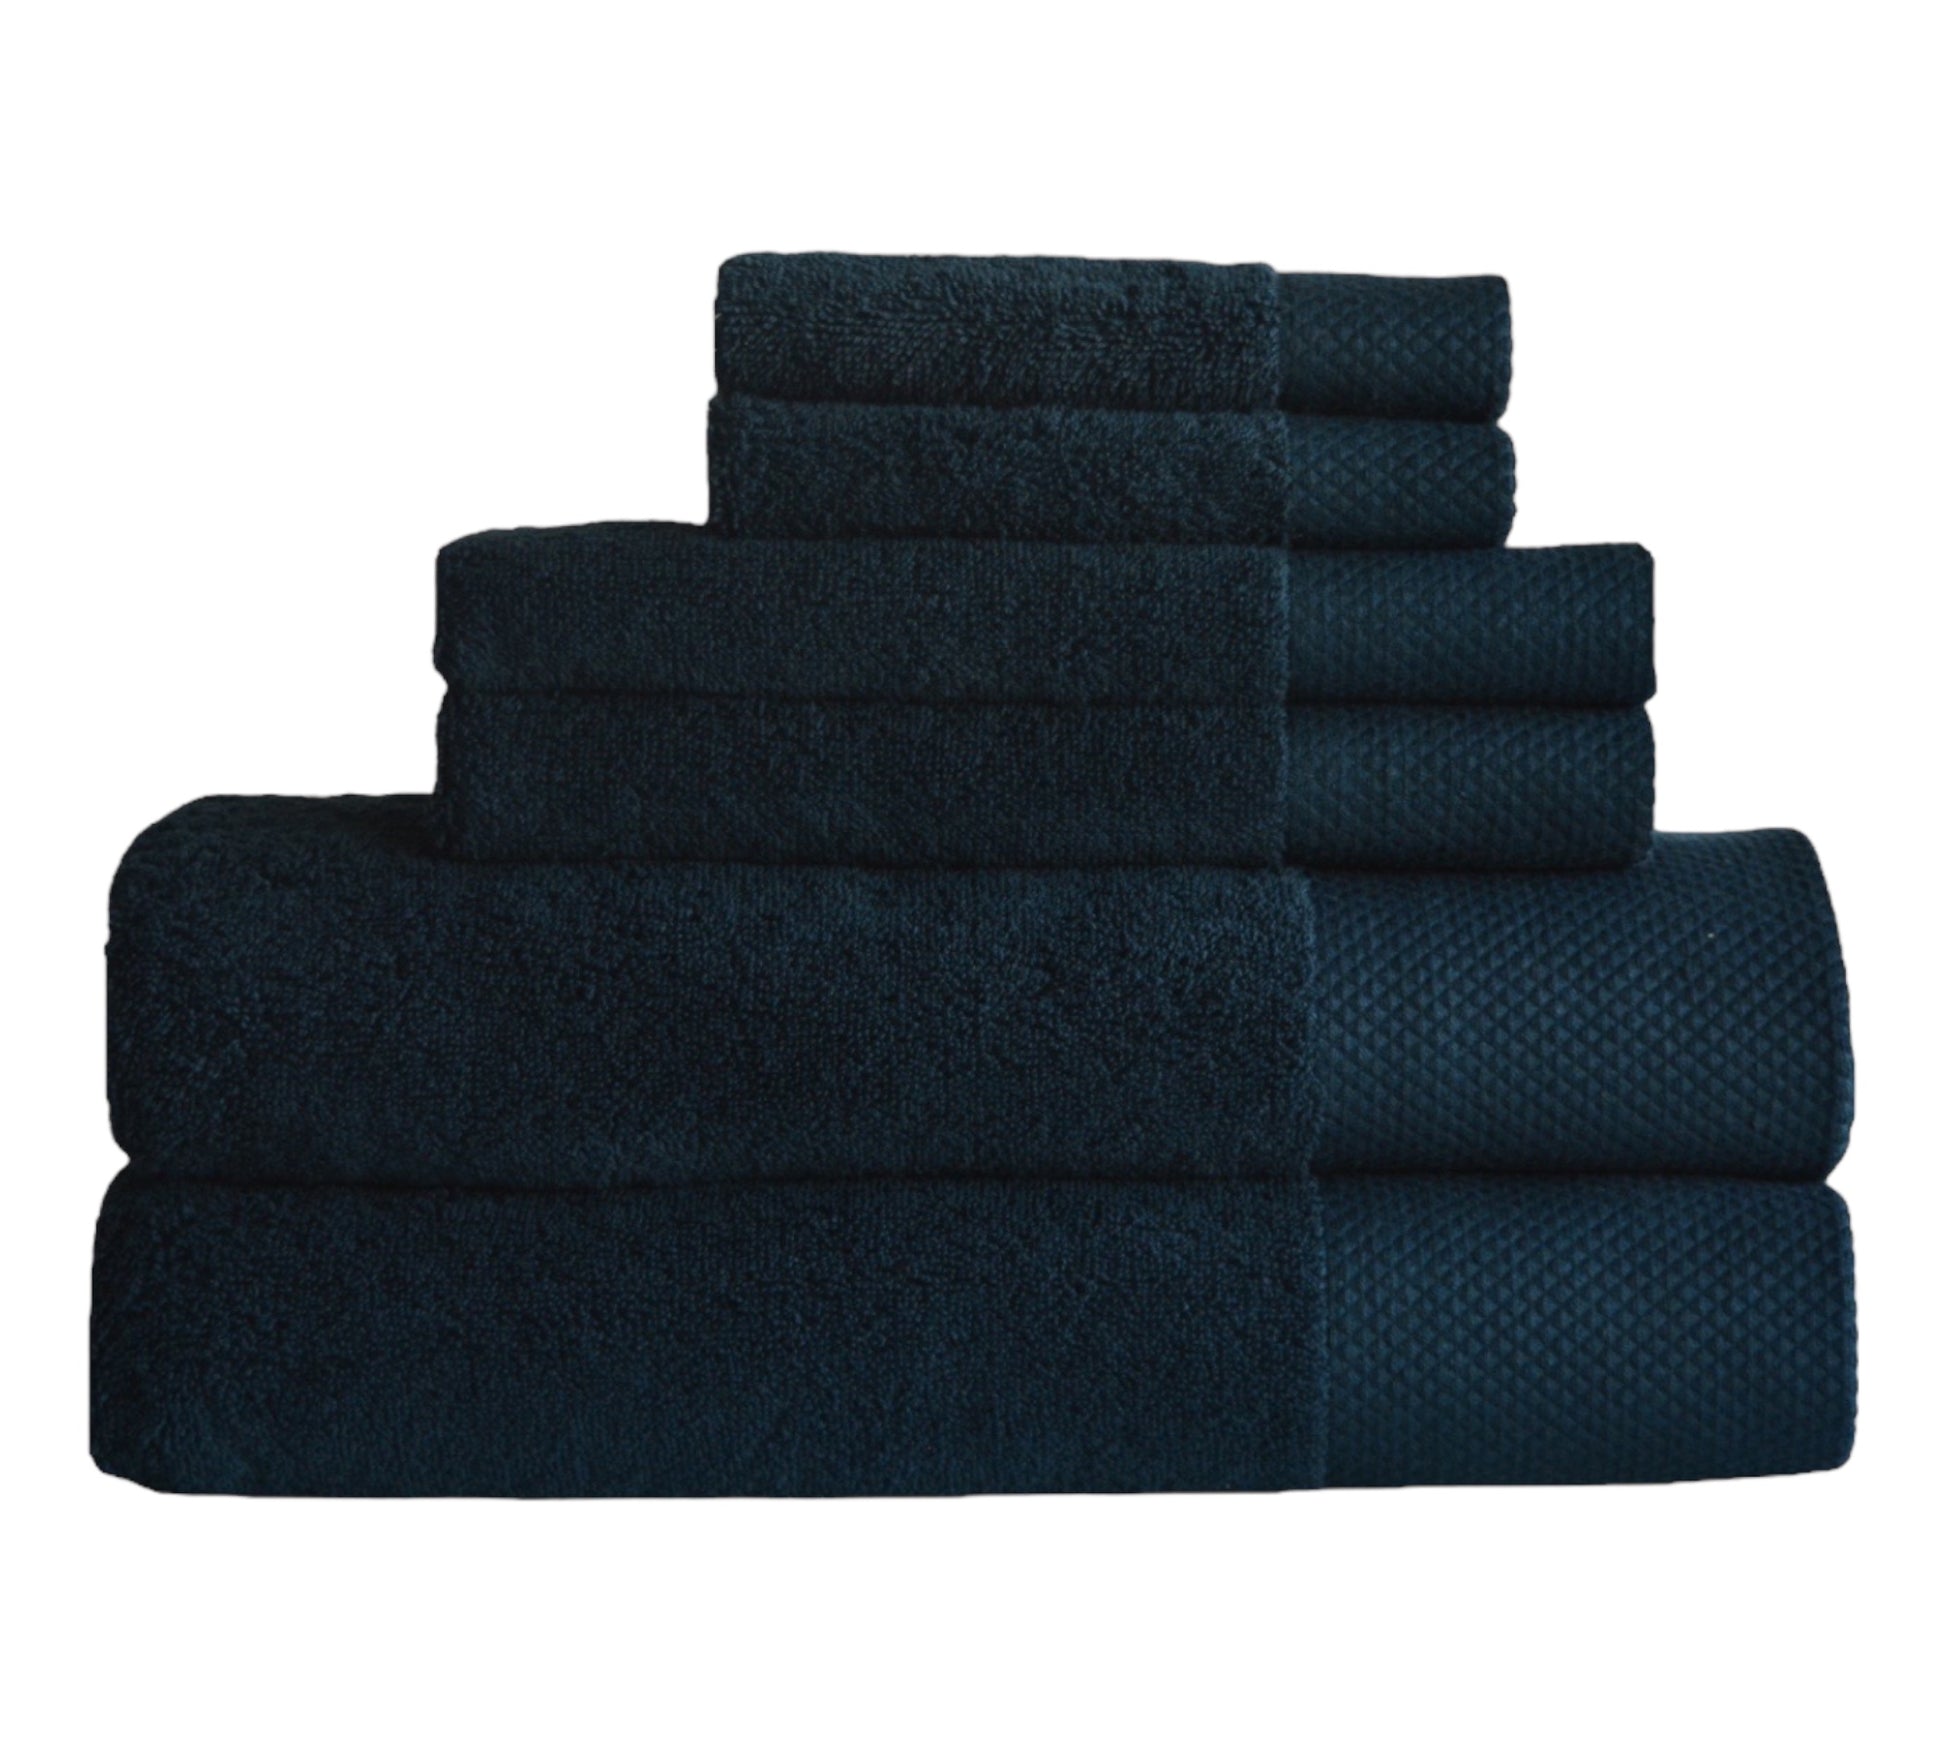 Cotton towels in Oregon Forest (dark green) color